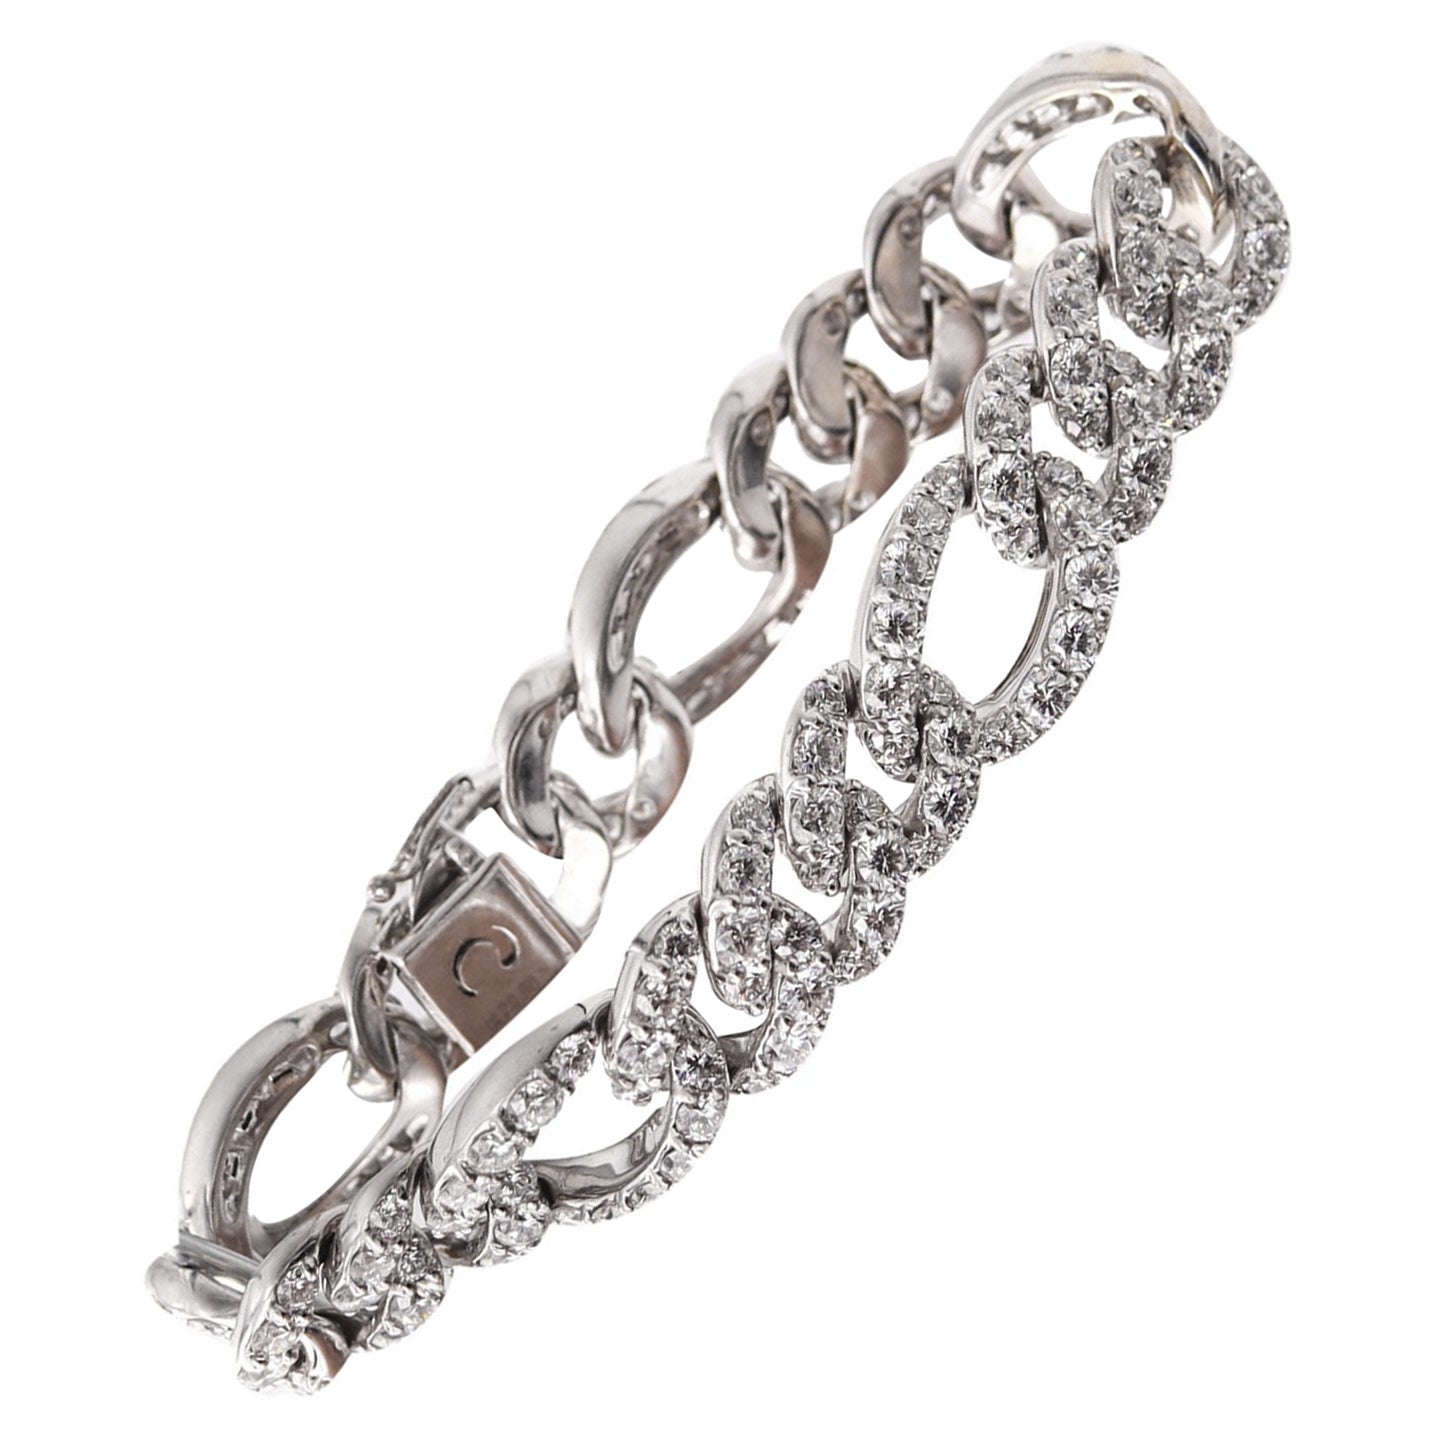 Crivelli Gioielli Exceptional Figaro Bracelet 18Kt Gold With 20.50 Ctw Diamonds For Sale